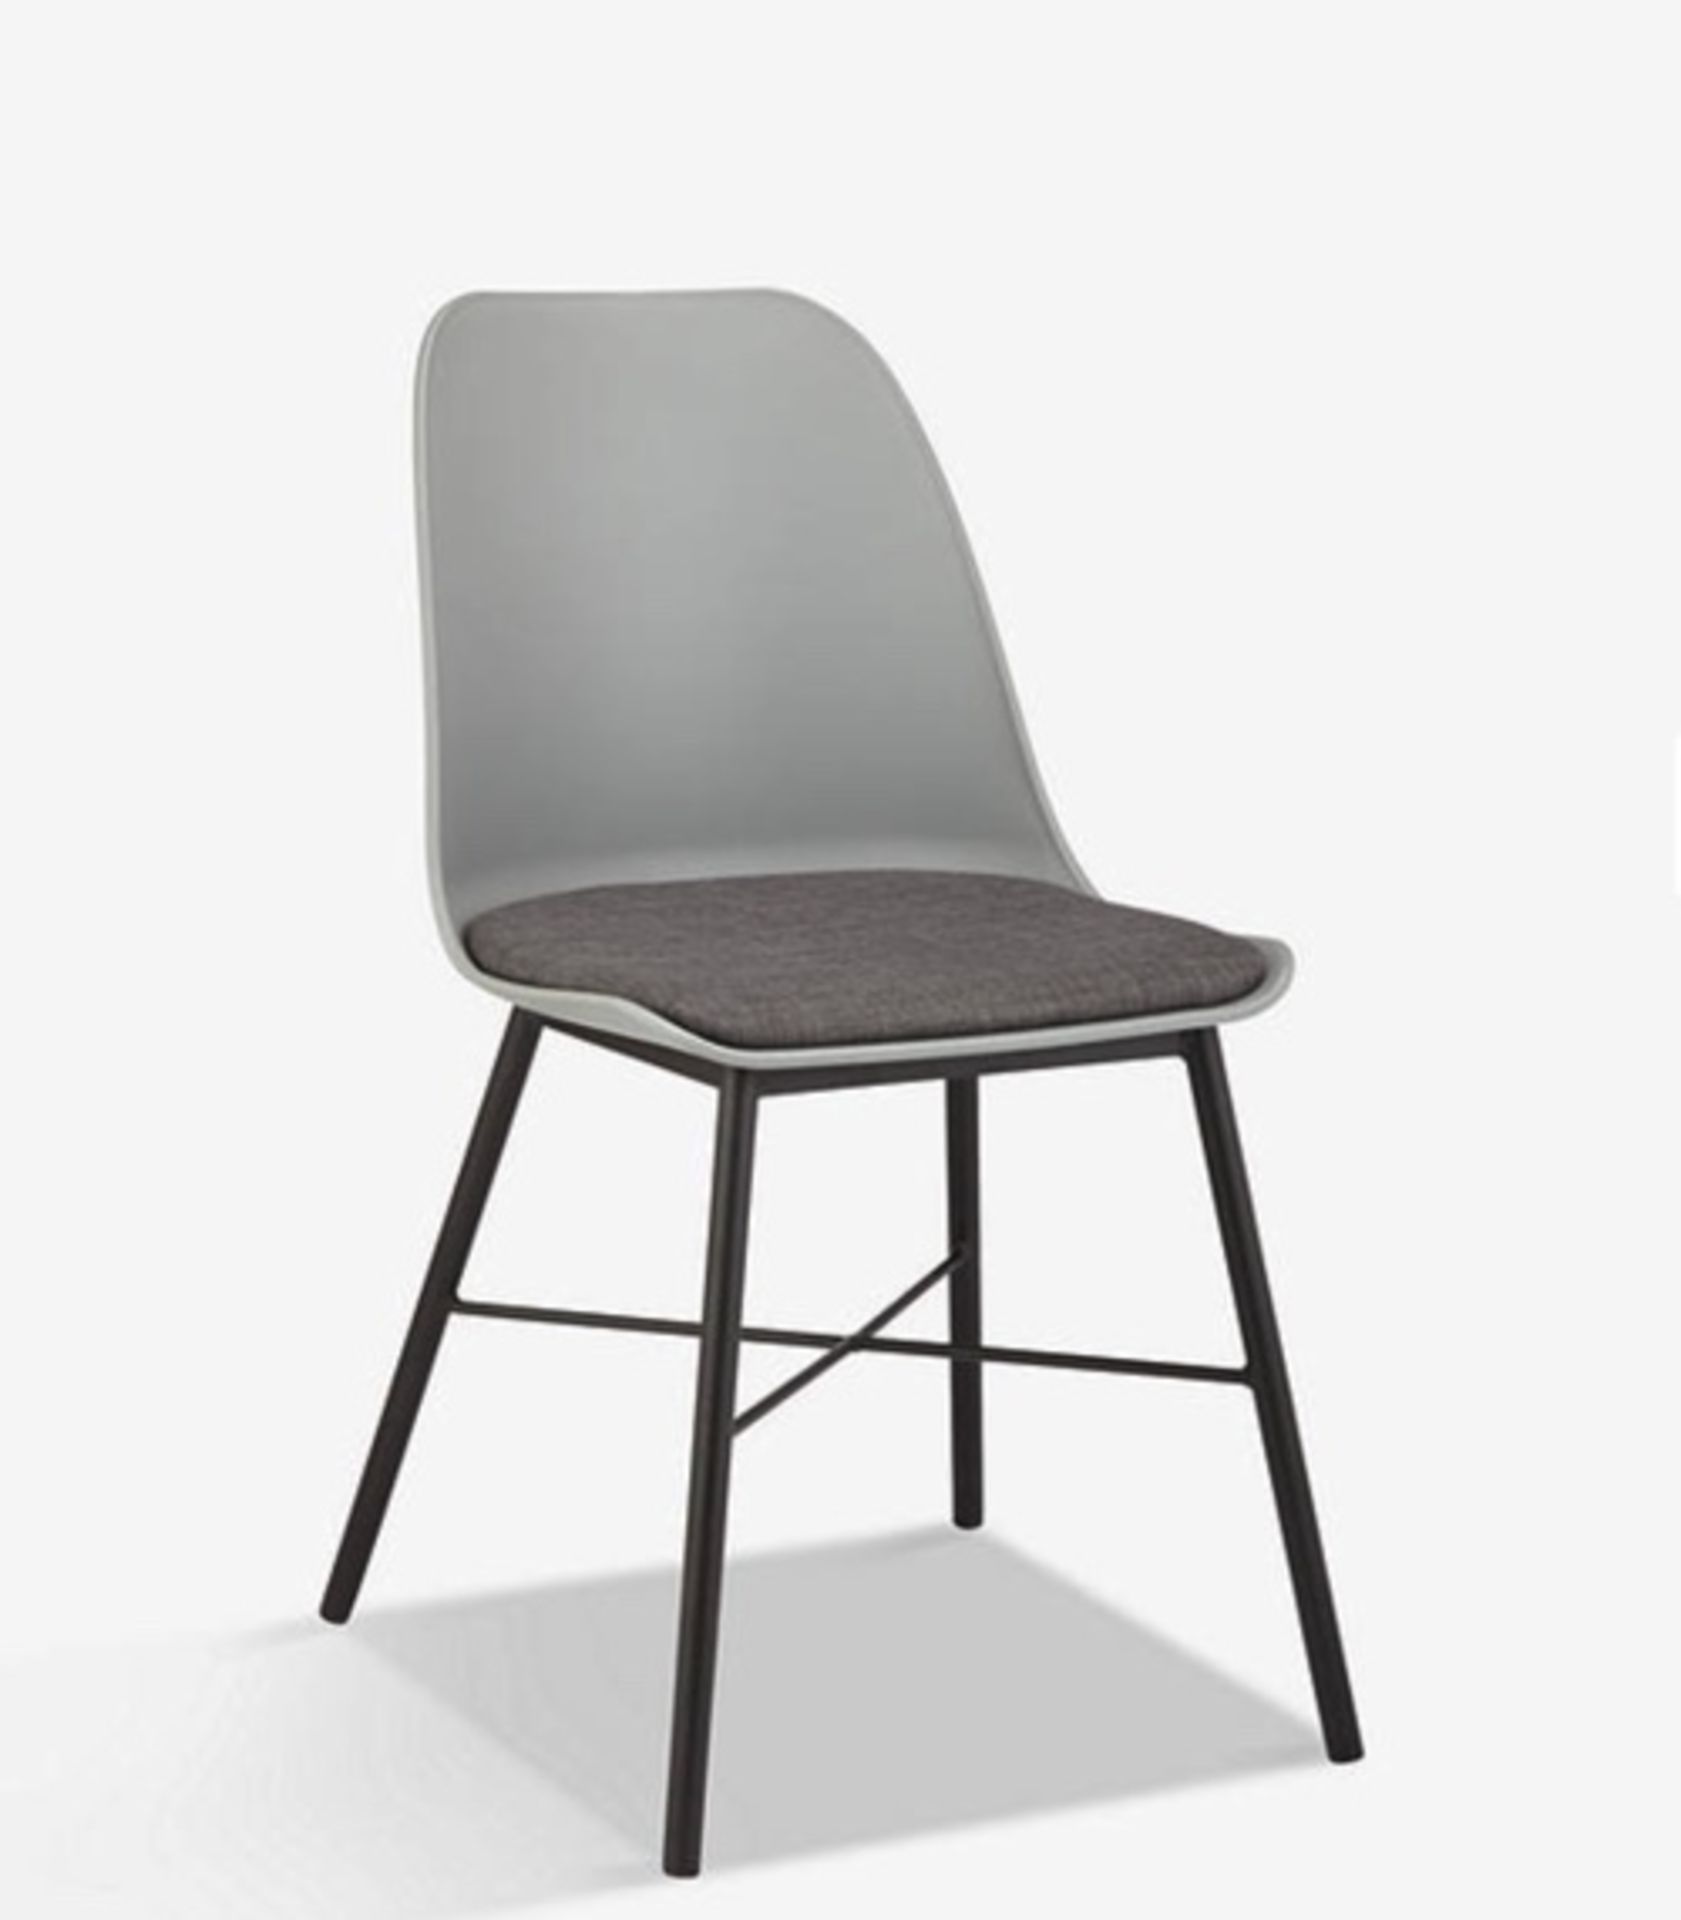 John Lewis ANYDAY Whistler Dining Chair, Dusty Grey RRP £99